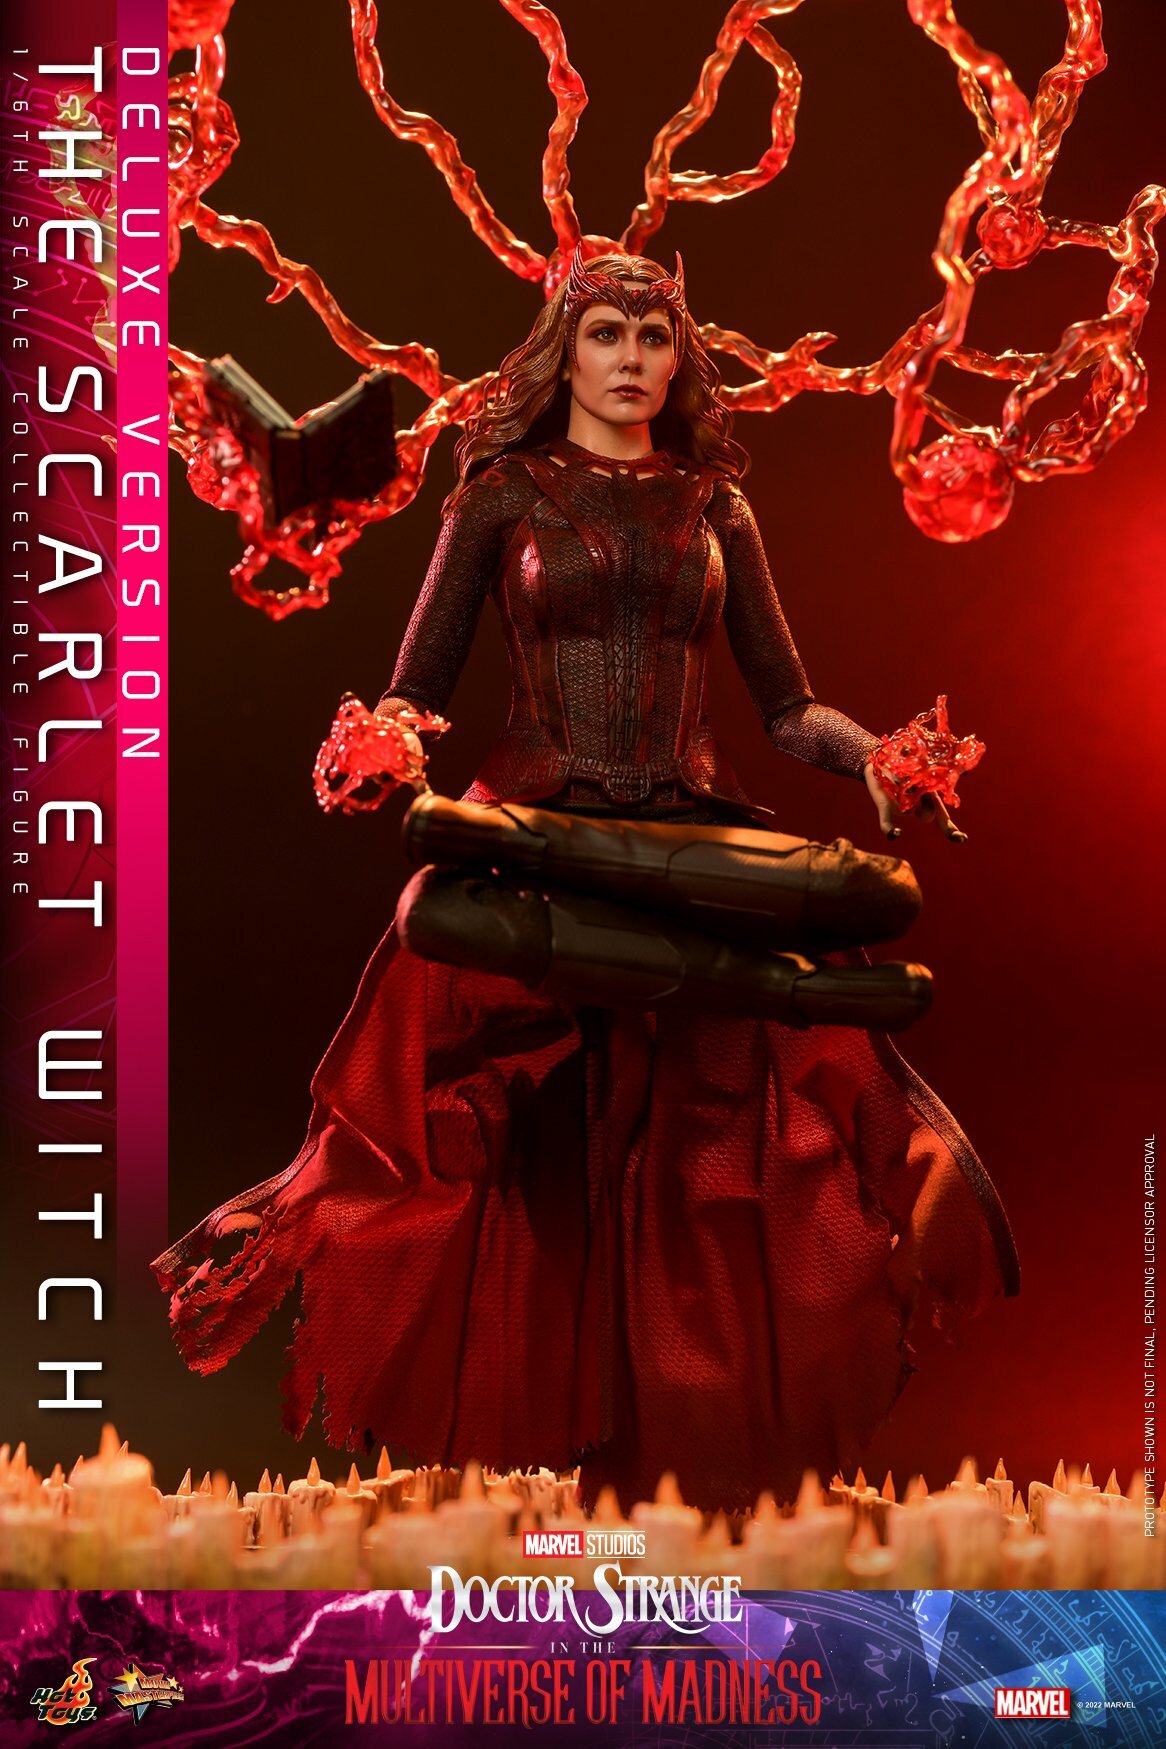 Hot-Toy-Multiverse-of-Madness-Scarlet-Witch-DX-009.jpg.cf6b156bd7dbef2a557d9067332d0418.jpg